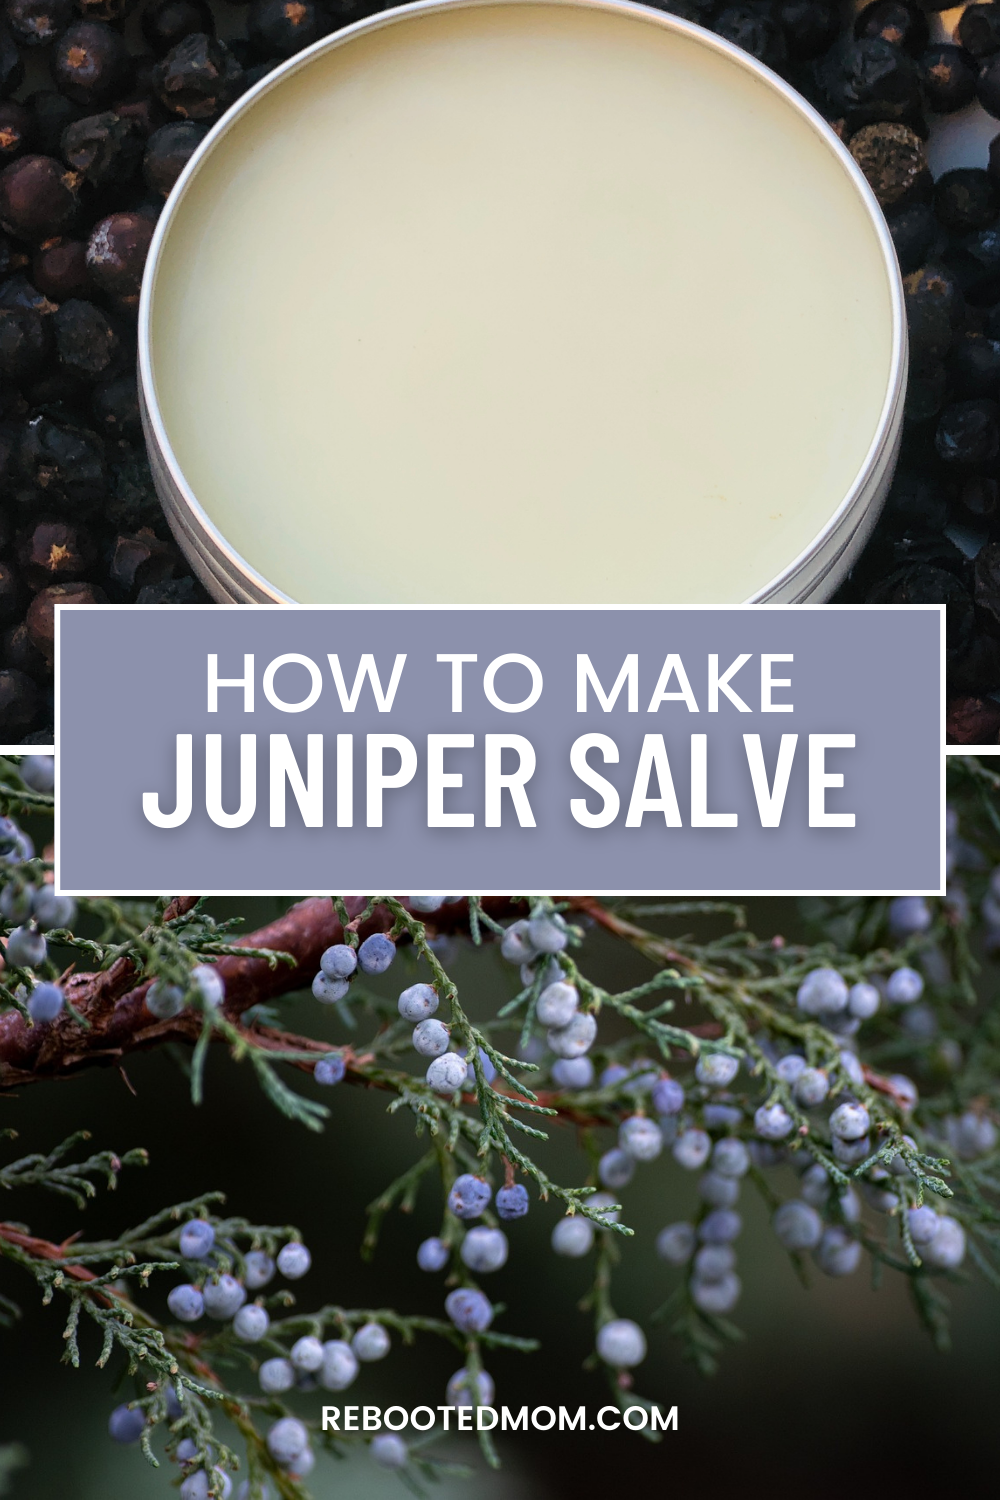 Juniper Salve is a delicately fragrant salve made with wild juniper berries and needles - it moisturizes skin while providing skin support in several areas.**